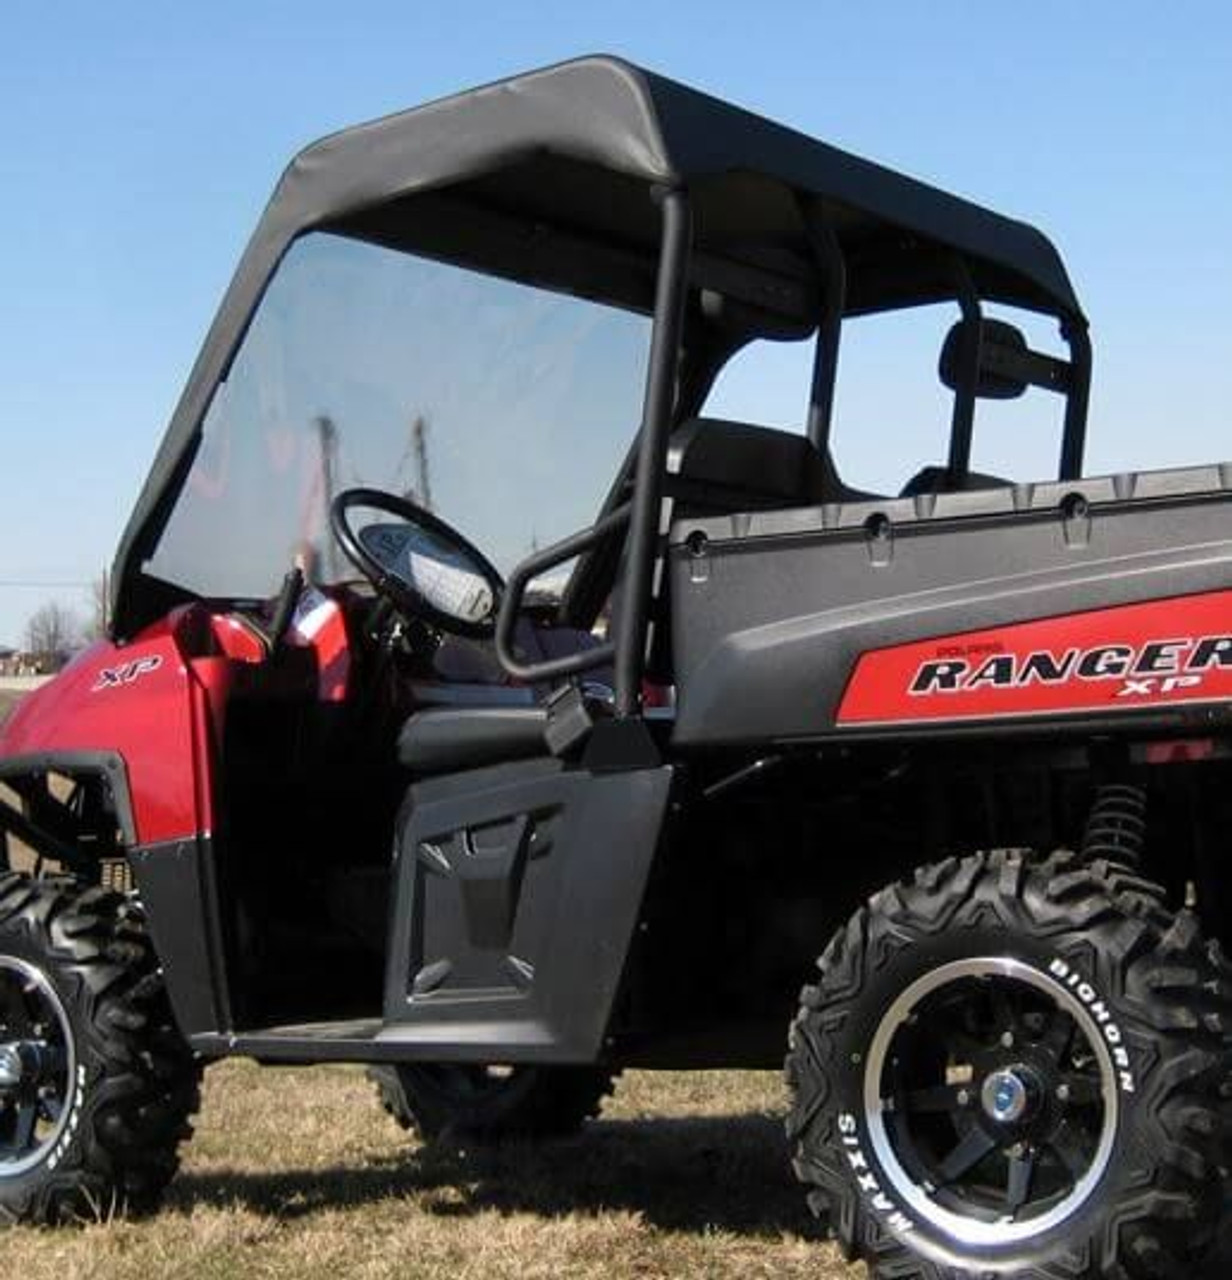 Soft Windshield and Top - Full-Size Polaris Ranger